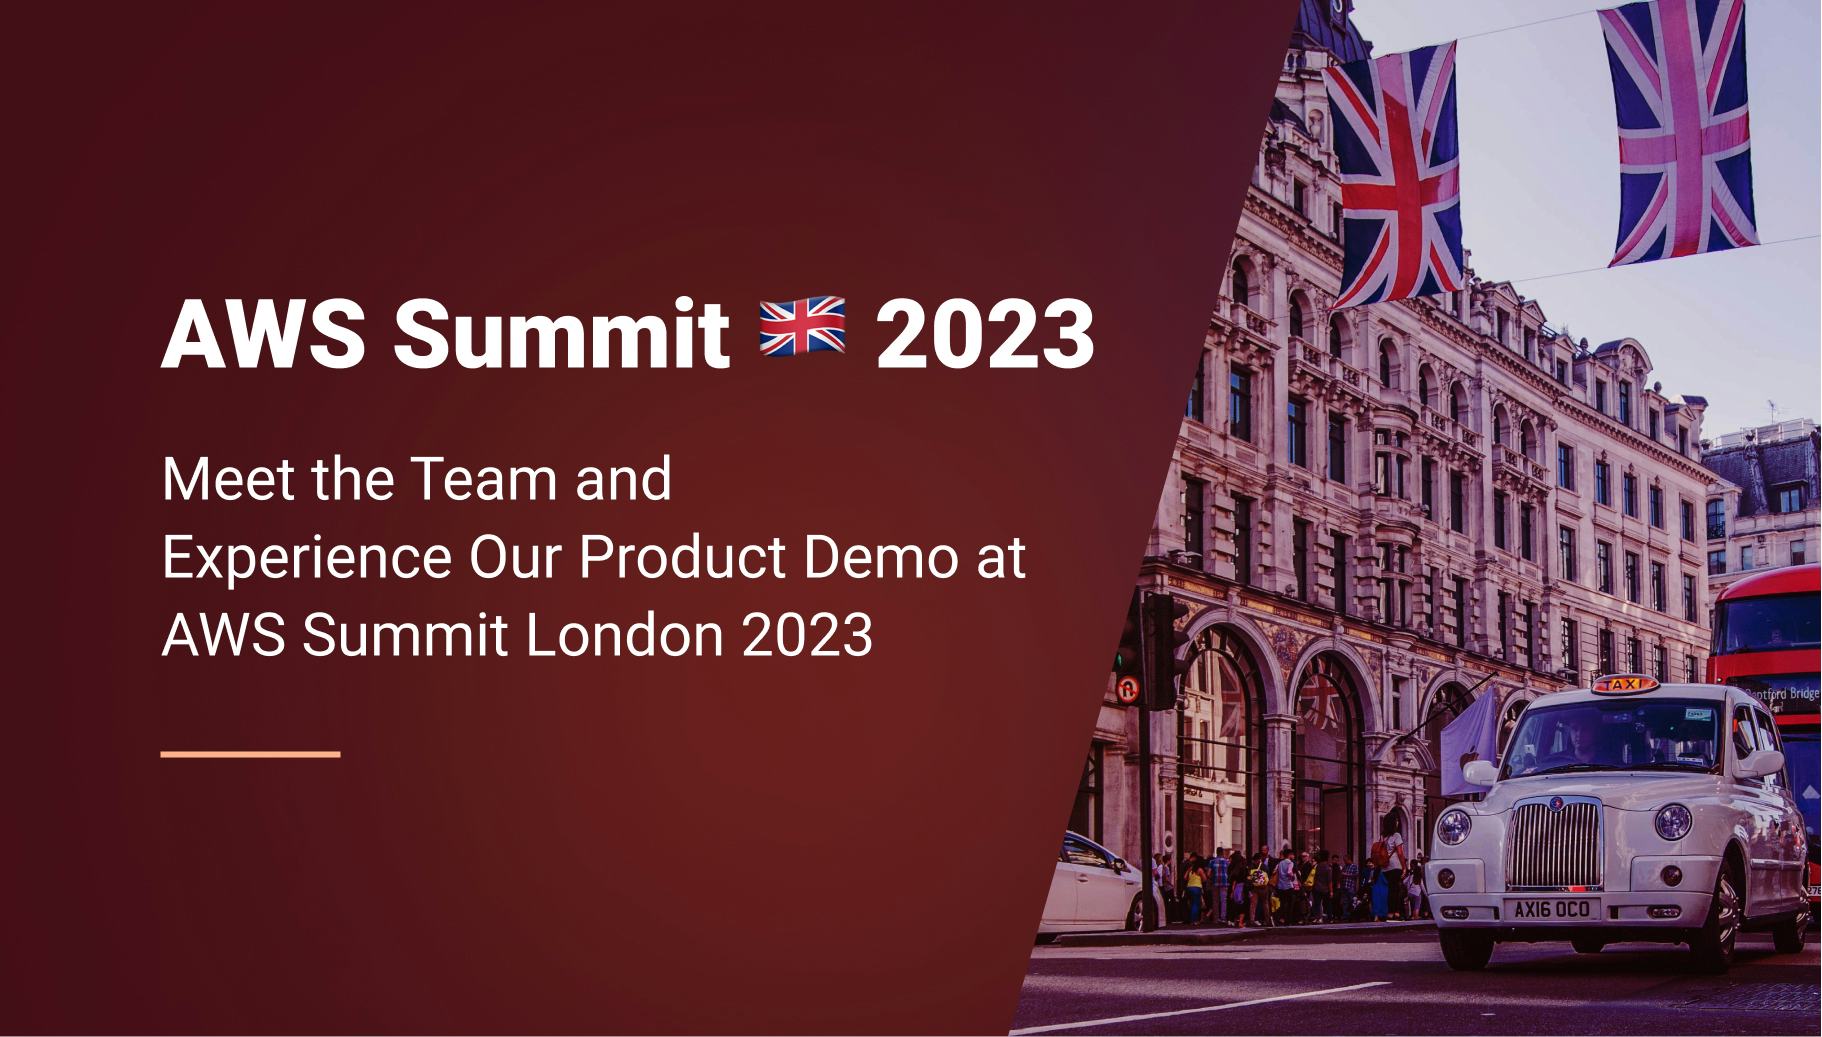 Join Qovery at AWS Summit London 2023 - Meet the Team and Experience Our Product Demo! - Qovery